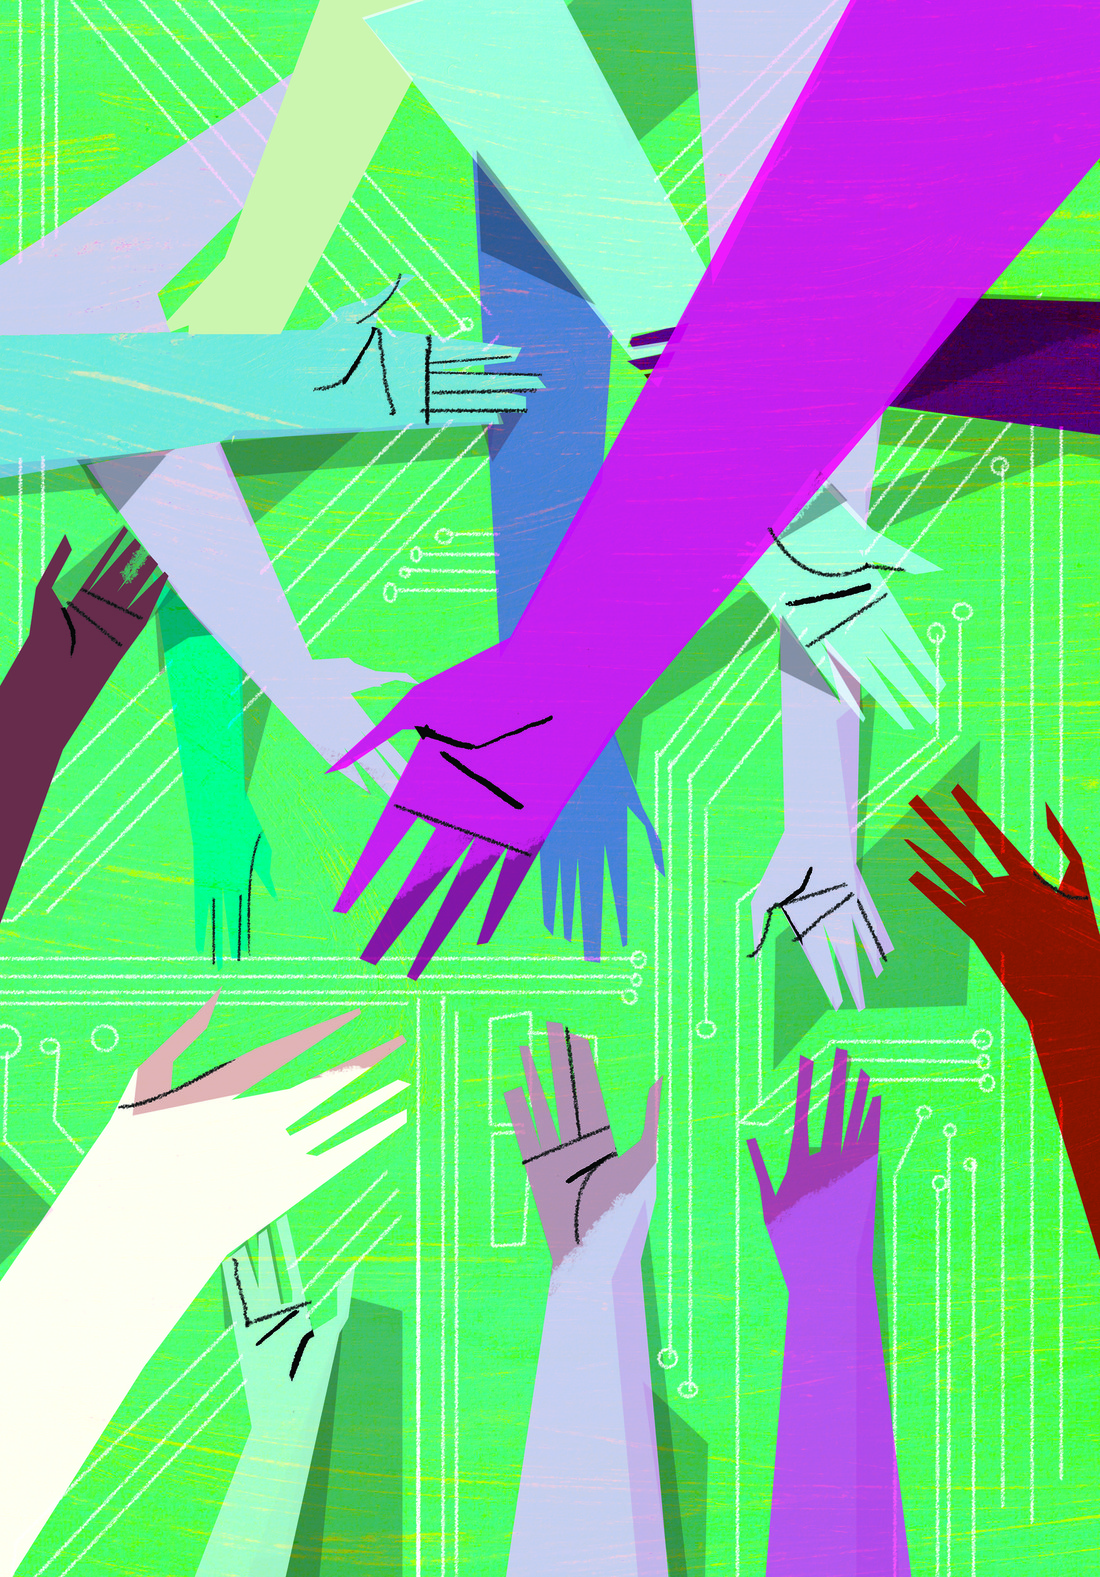 Drawing of brightly colored hands reaching toward each other.